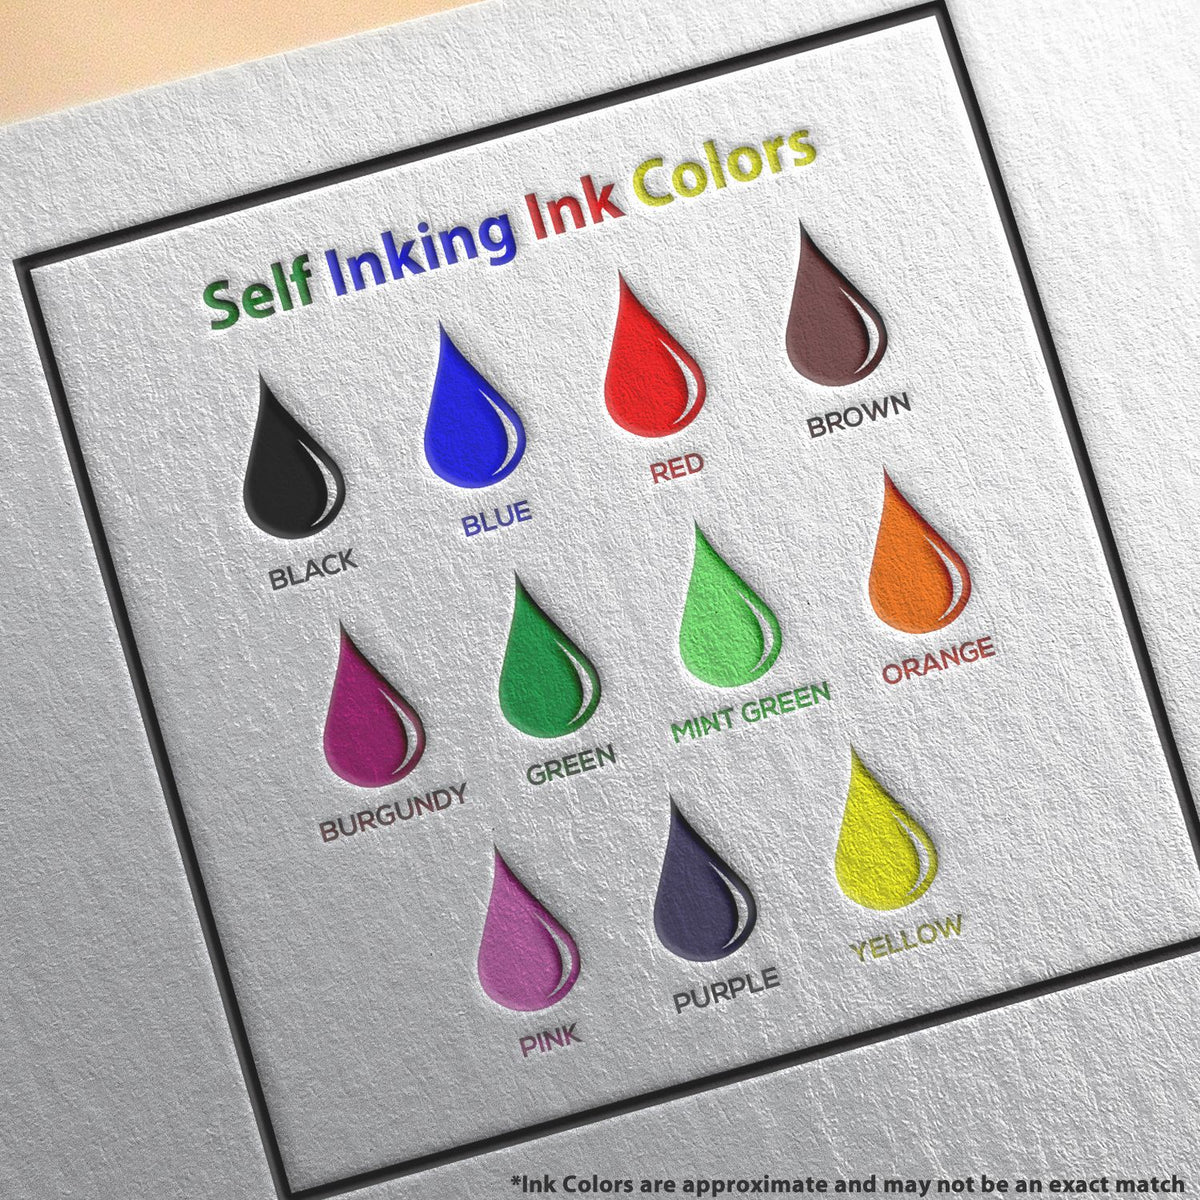 A picture showing the different ink colors or hues available for the Self-Inking Ohio Landscape Architect Stamp product.